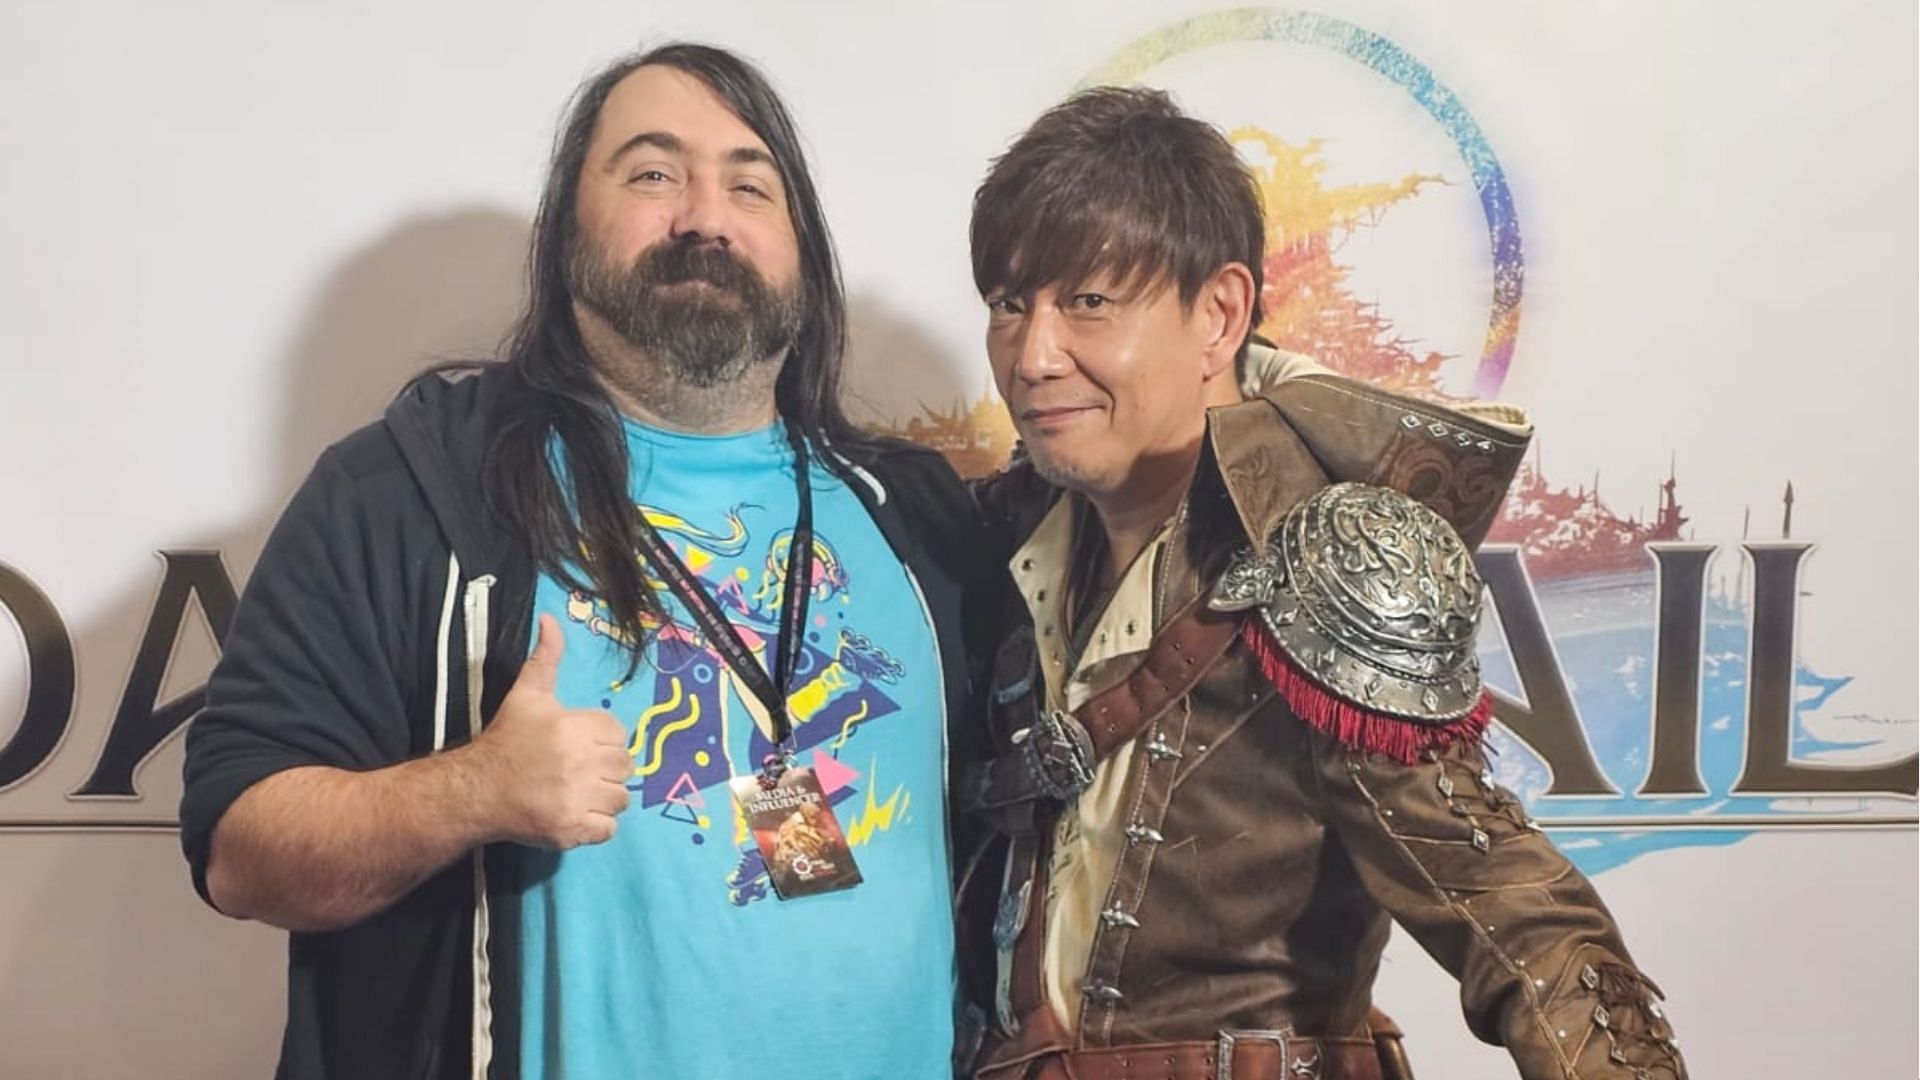 We had a chat with Yoshi-P during Fan Fest London.